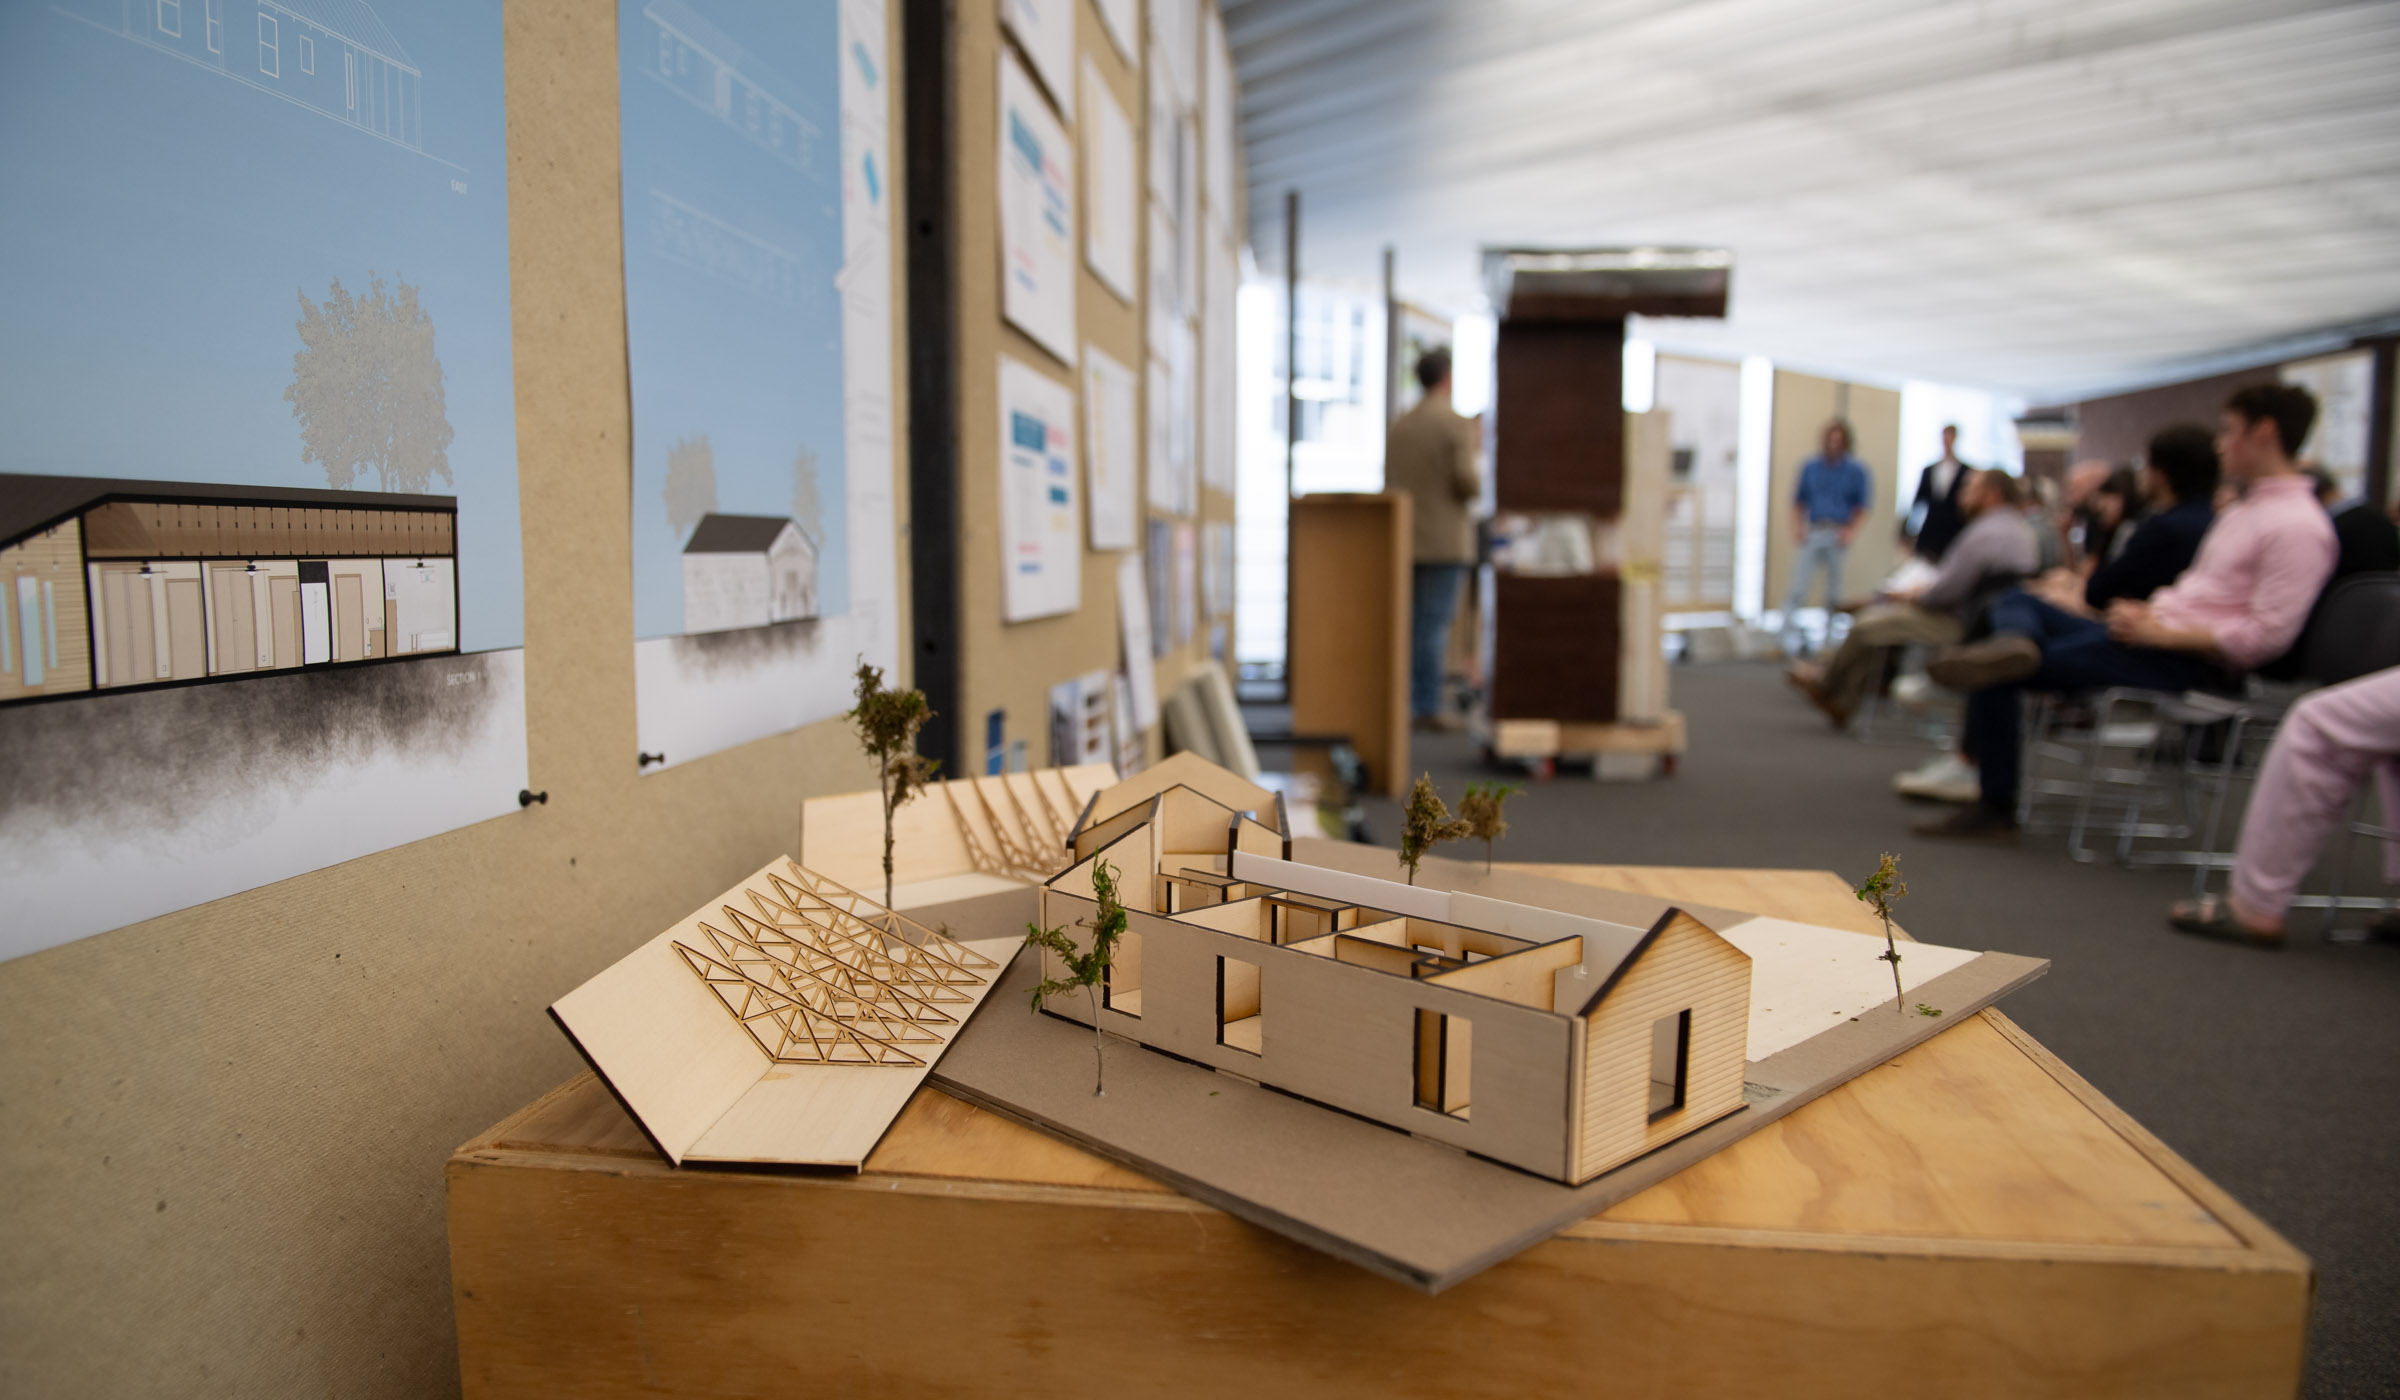 A 3D architectural model of a house is in focus in the foreground on a wooden pedestal, with students presenting their projects to seated attendees in the background.